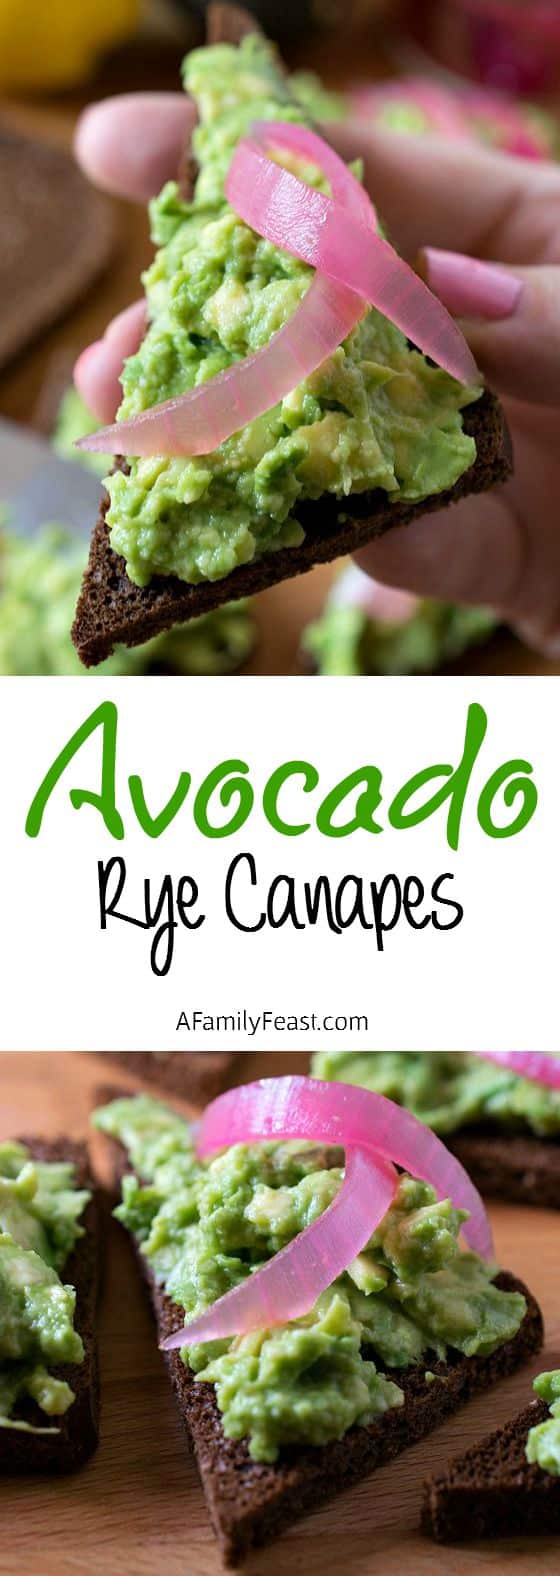 Avocado Rye Canapés - An easy and delicious recipe that is great as an appetizer or a light lunch!  AFamilyFeast.com